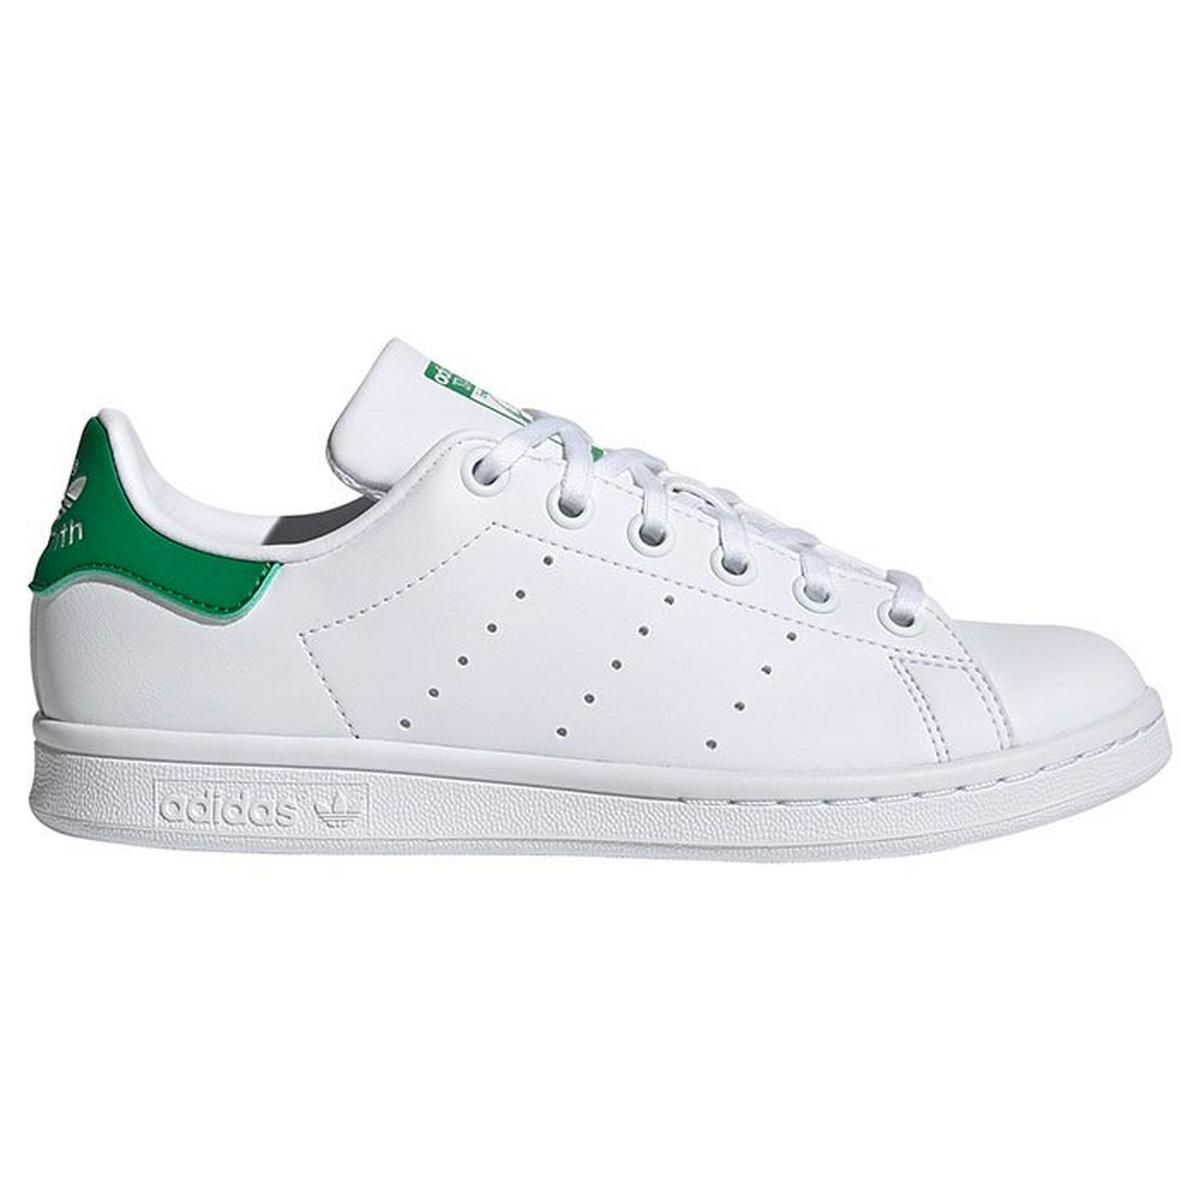 Chaussures Stan Smith pour juniors [3,5-7]